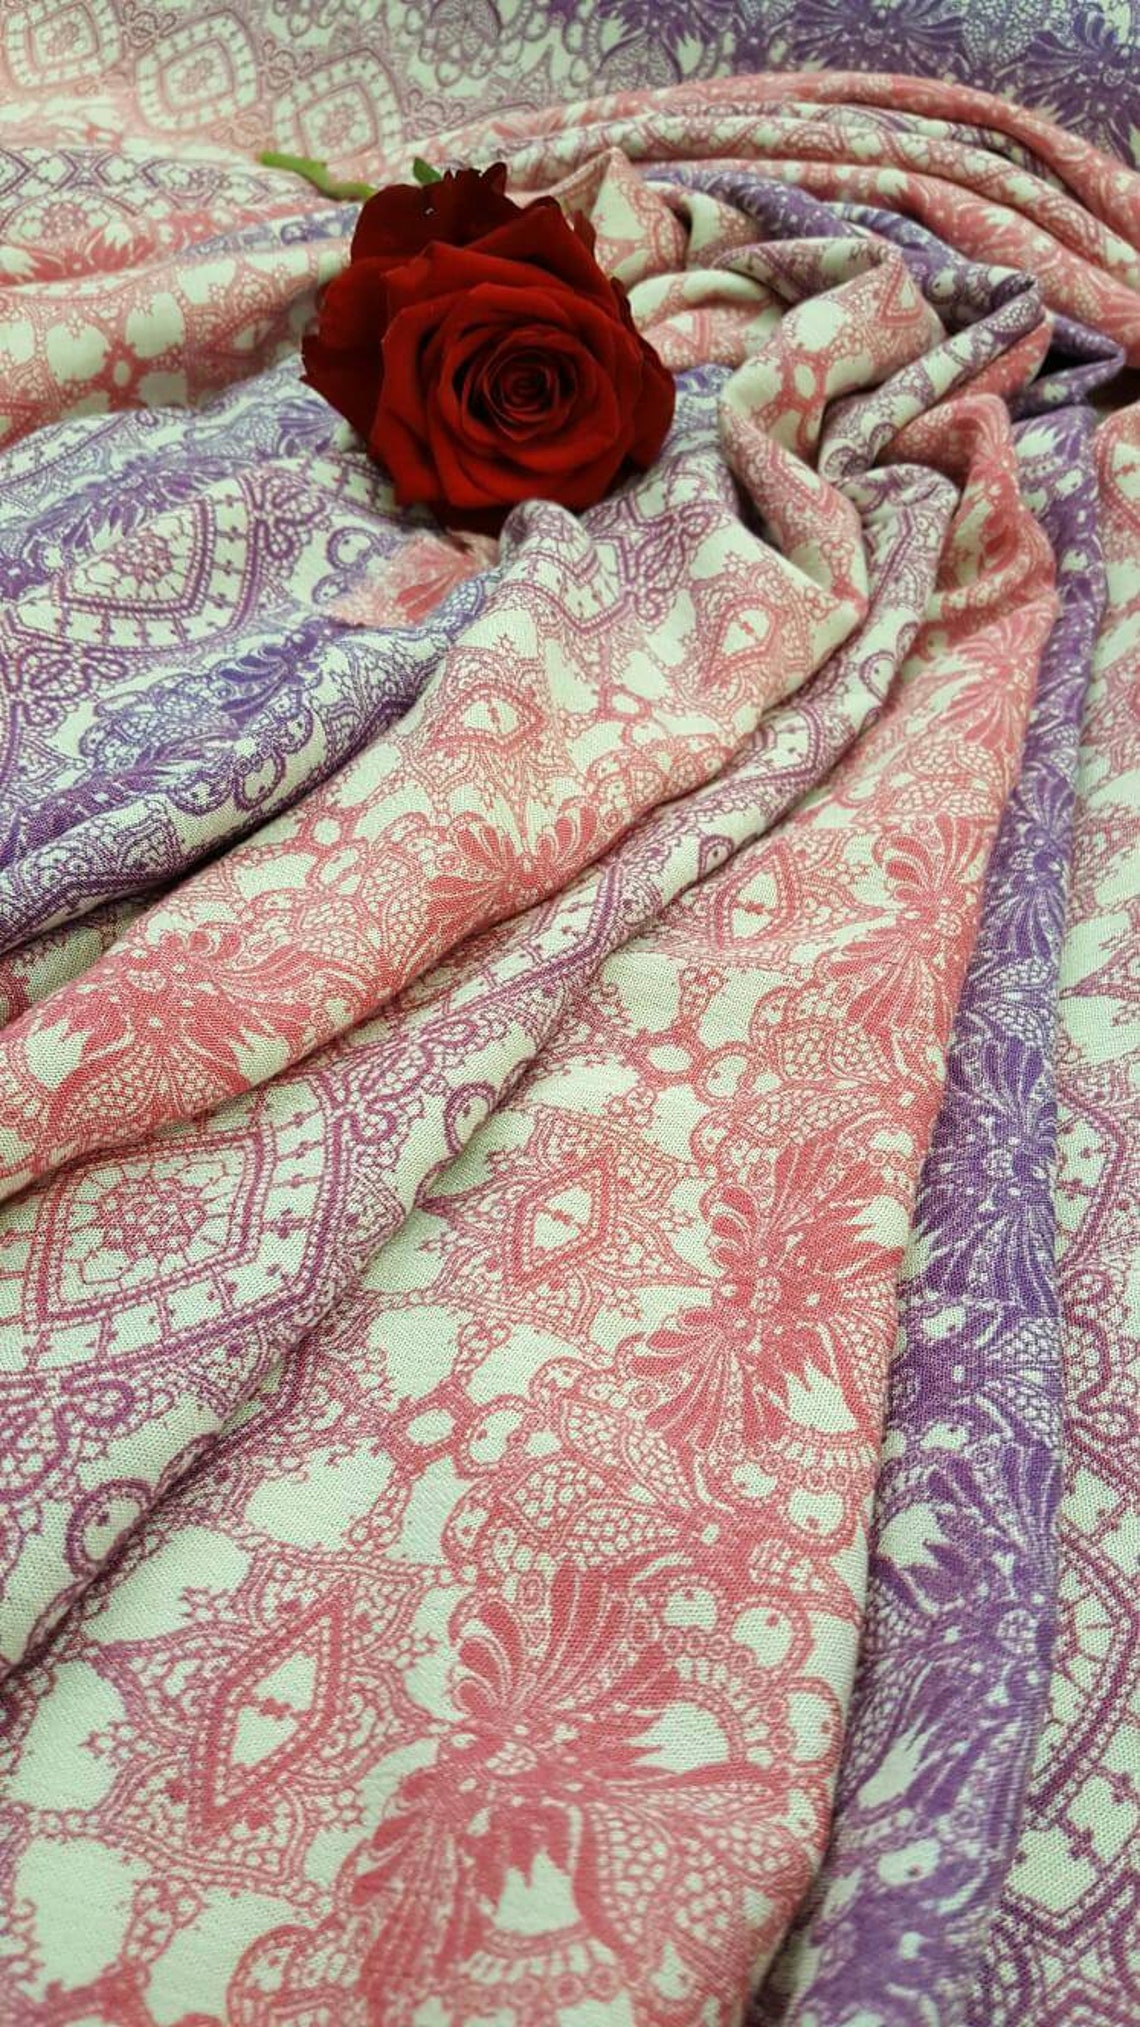 Rayon Challis Crepe Pink Lavender Fabric by the Yard Geometric | Etsy